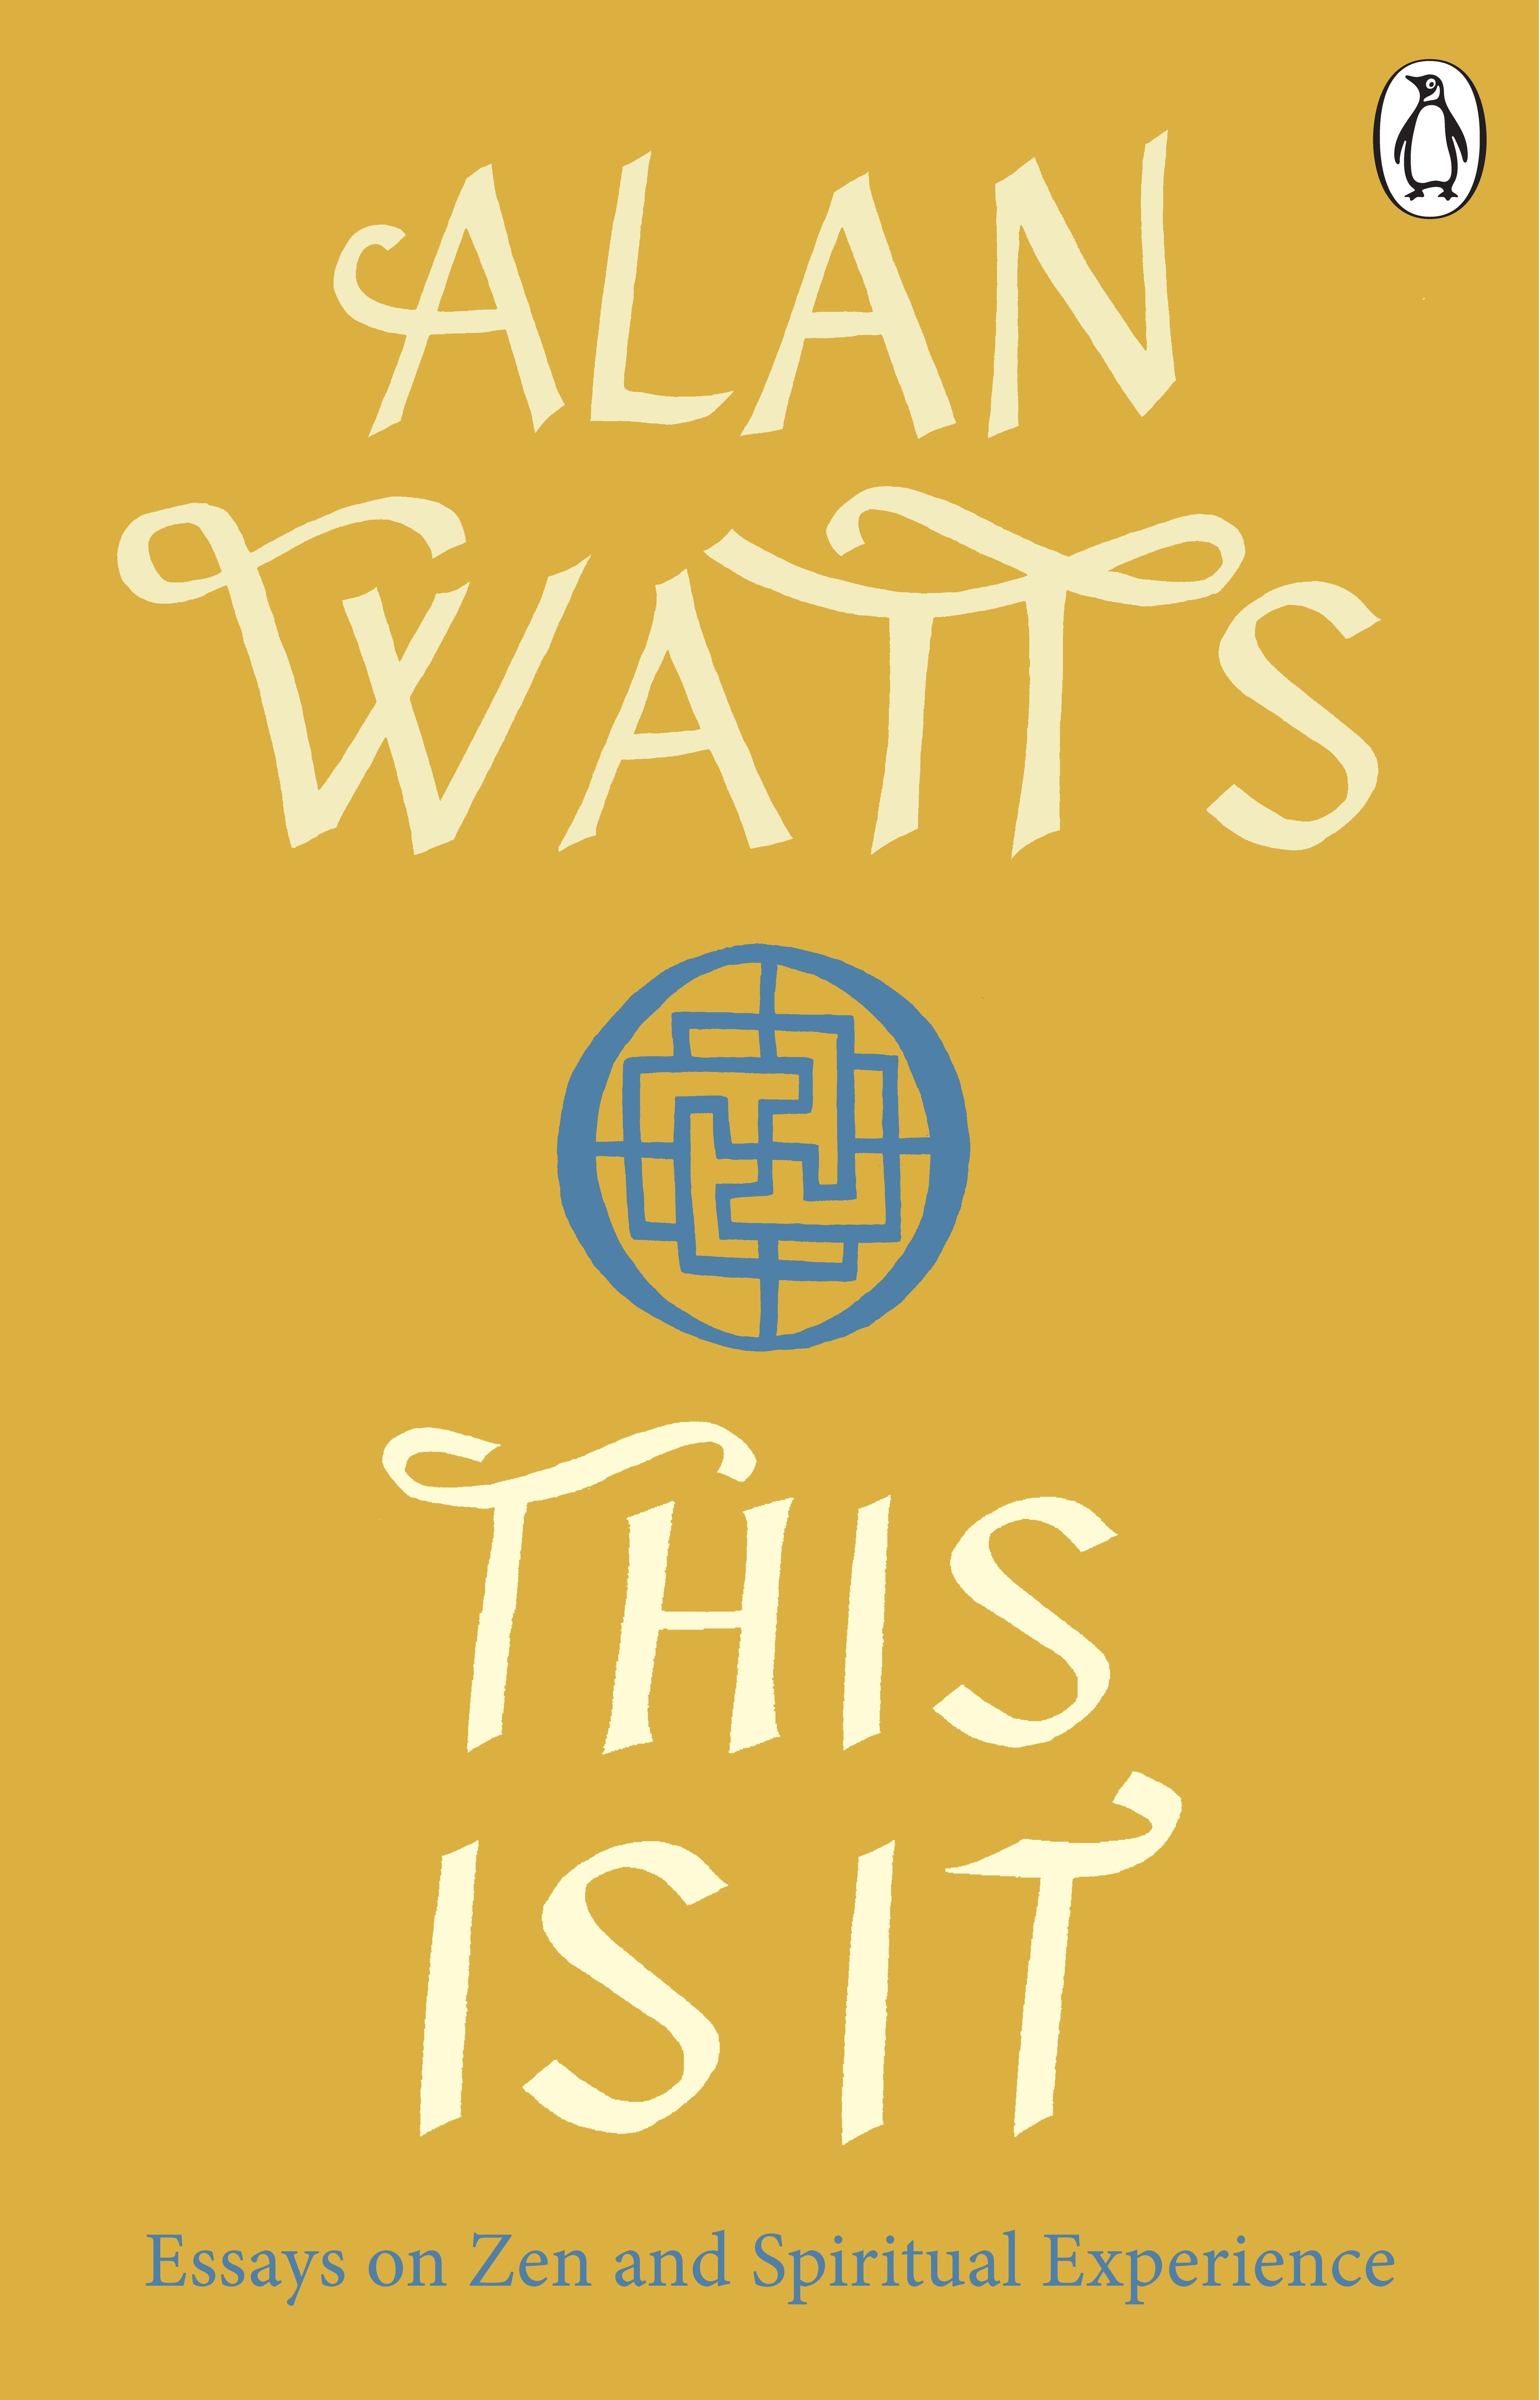 Book “This is It” by Alan W Watts — June 30, 2022